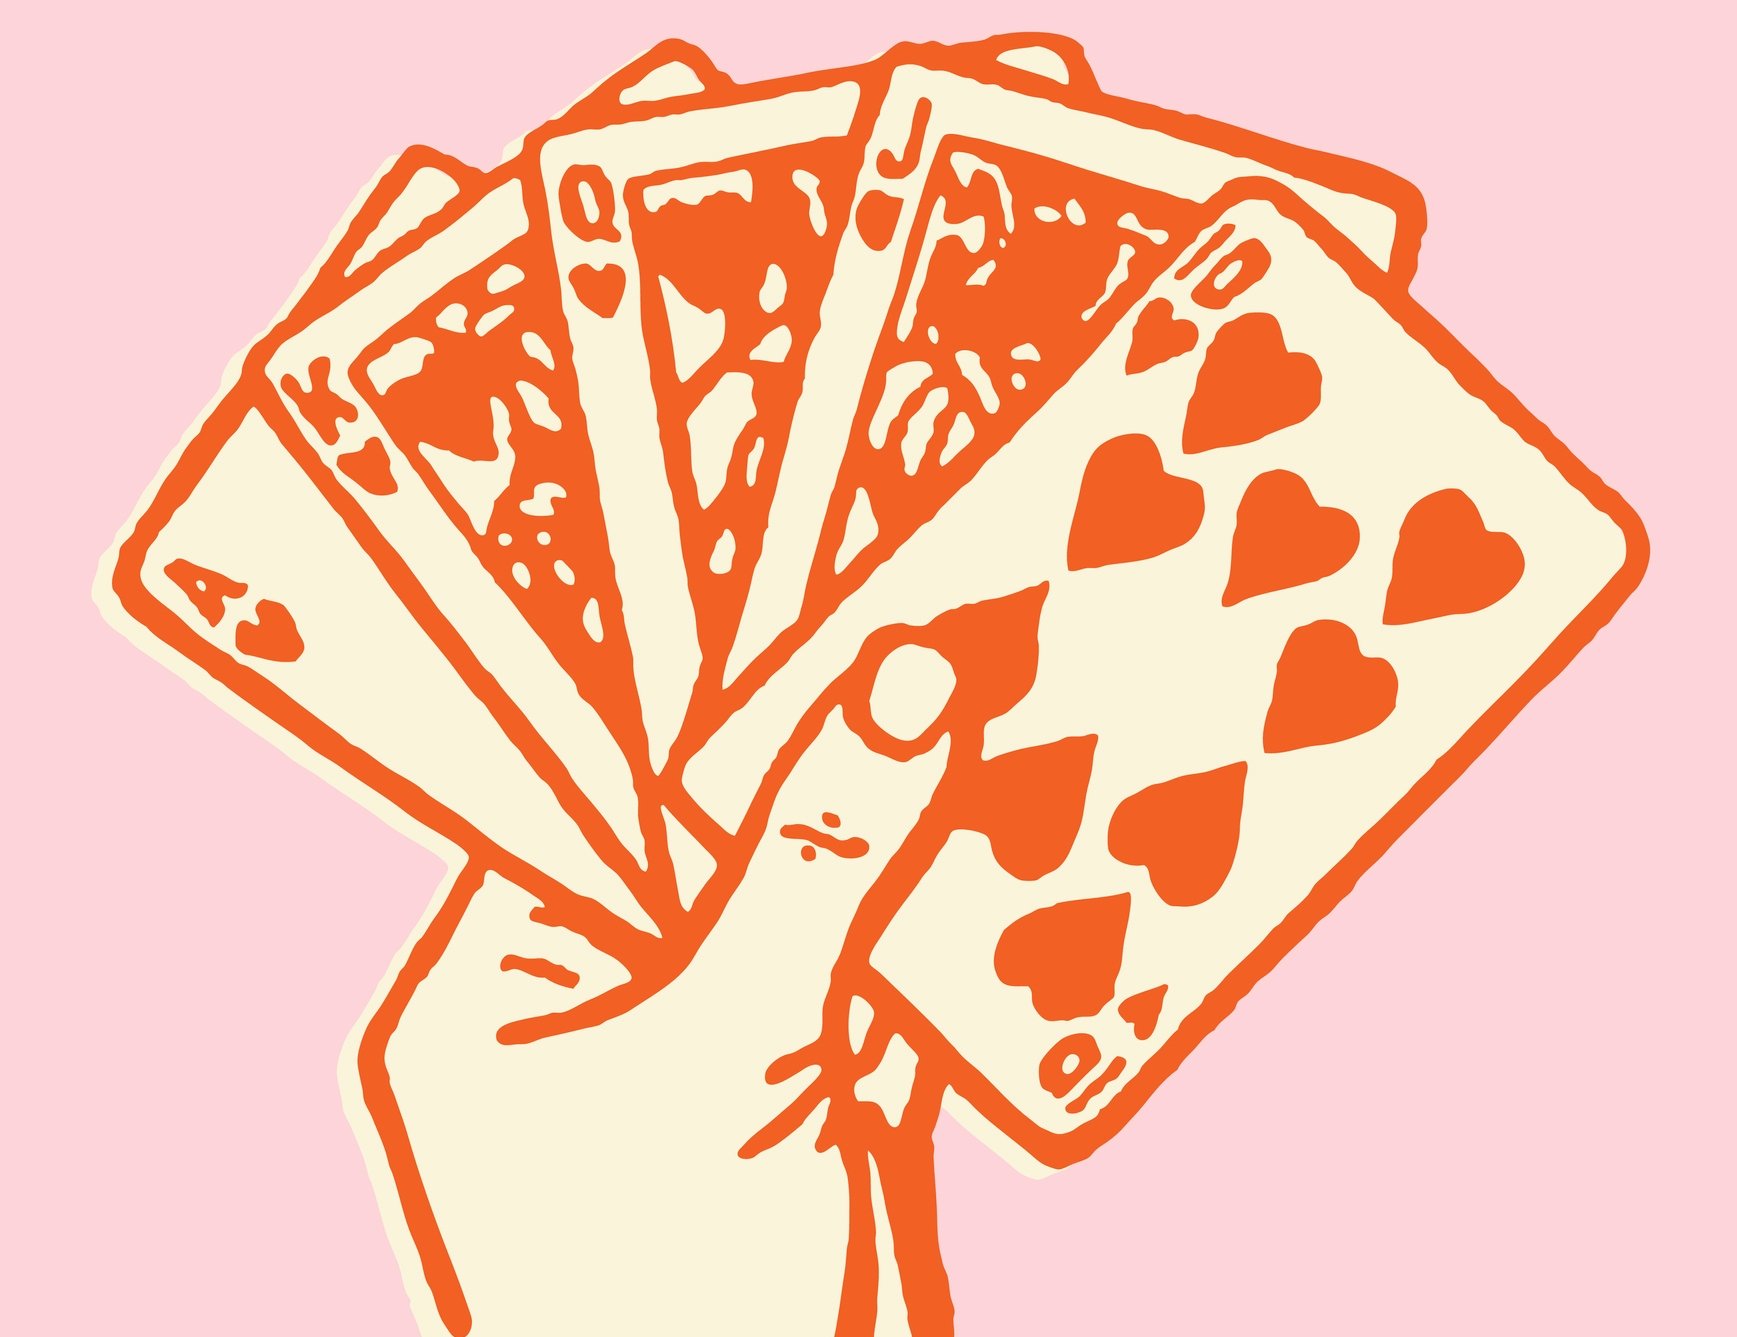 Illustration of a hand holding a fan of playing cards with heart suits, depicted in orange outlines against a pink background.